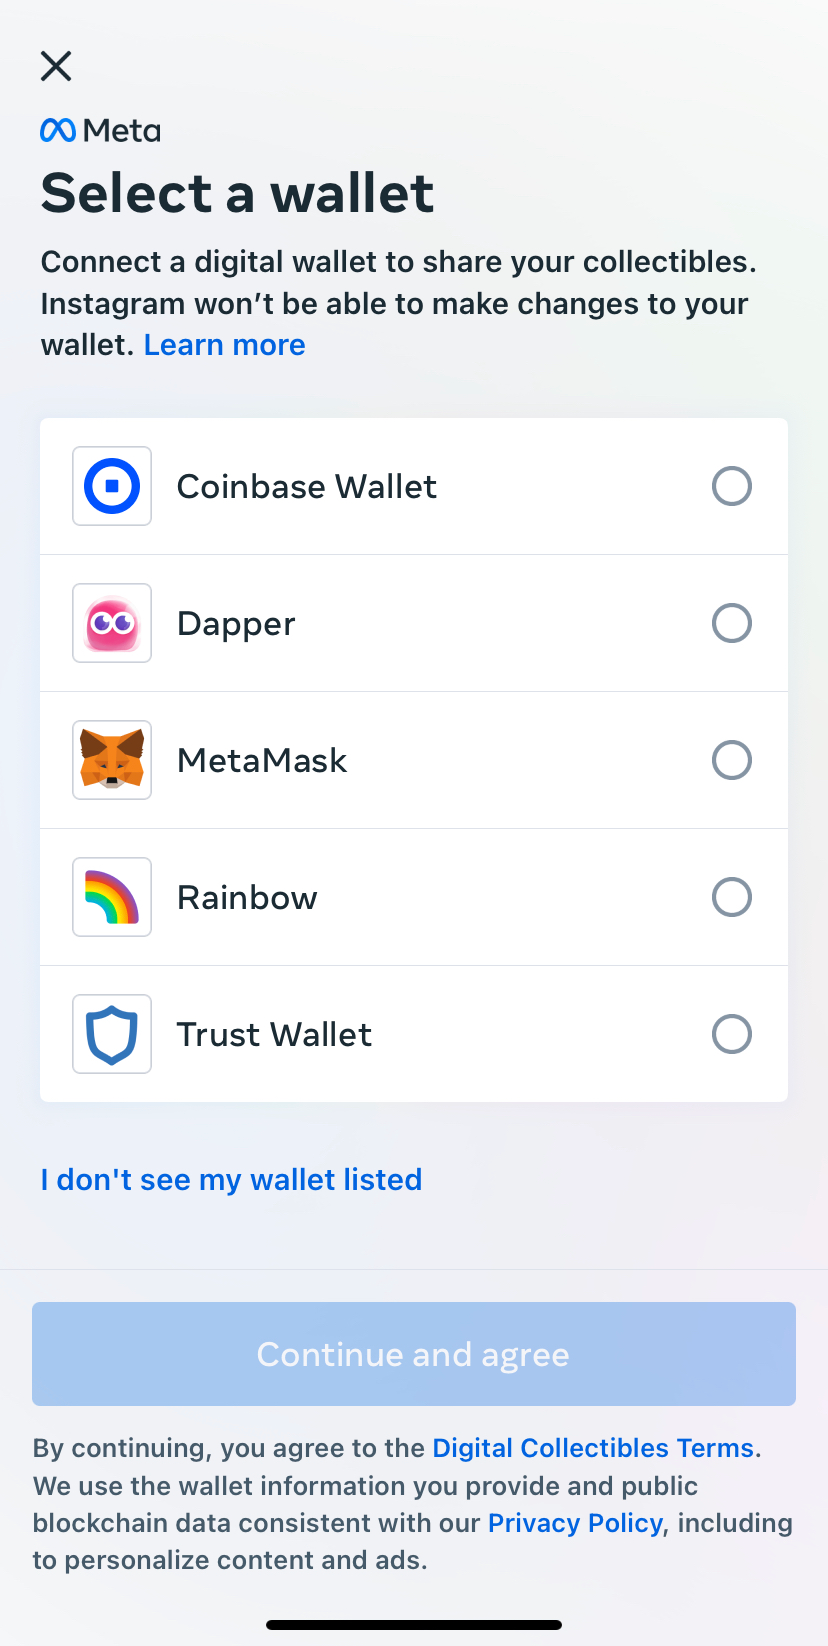 Choose your digital wallet from the list of wallets and log in & Select your favorite NFTs to share with your community!